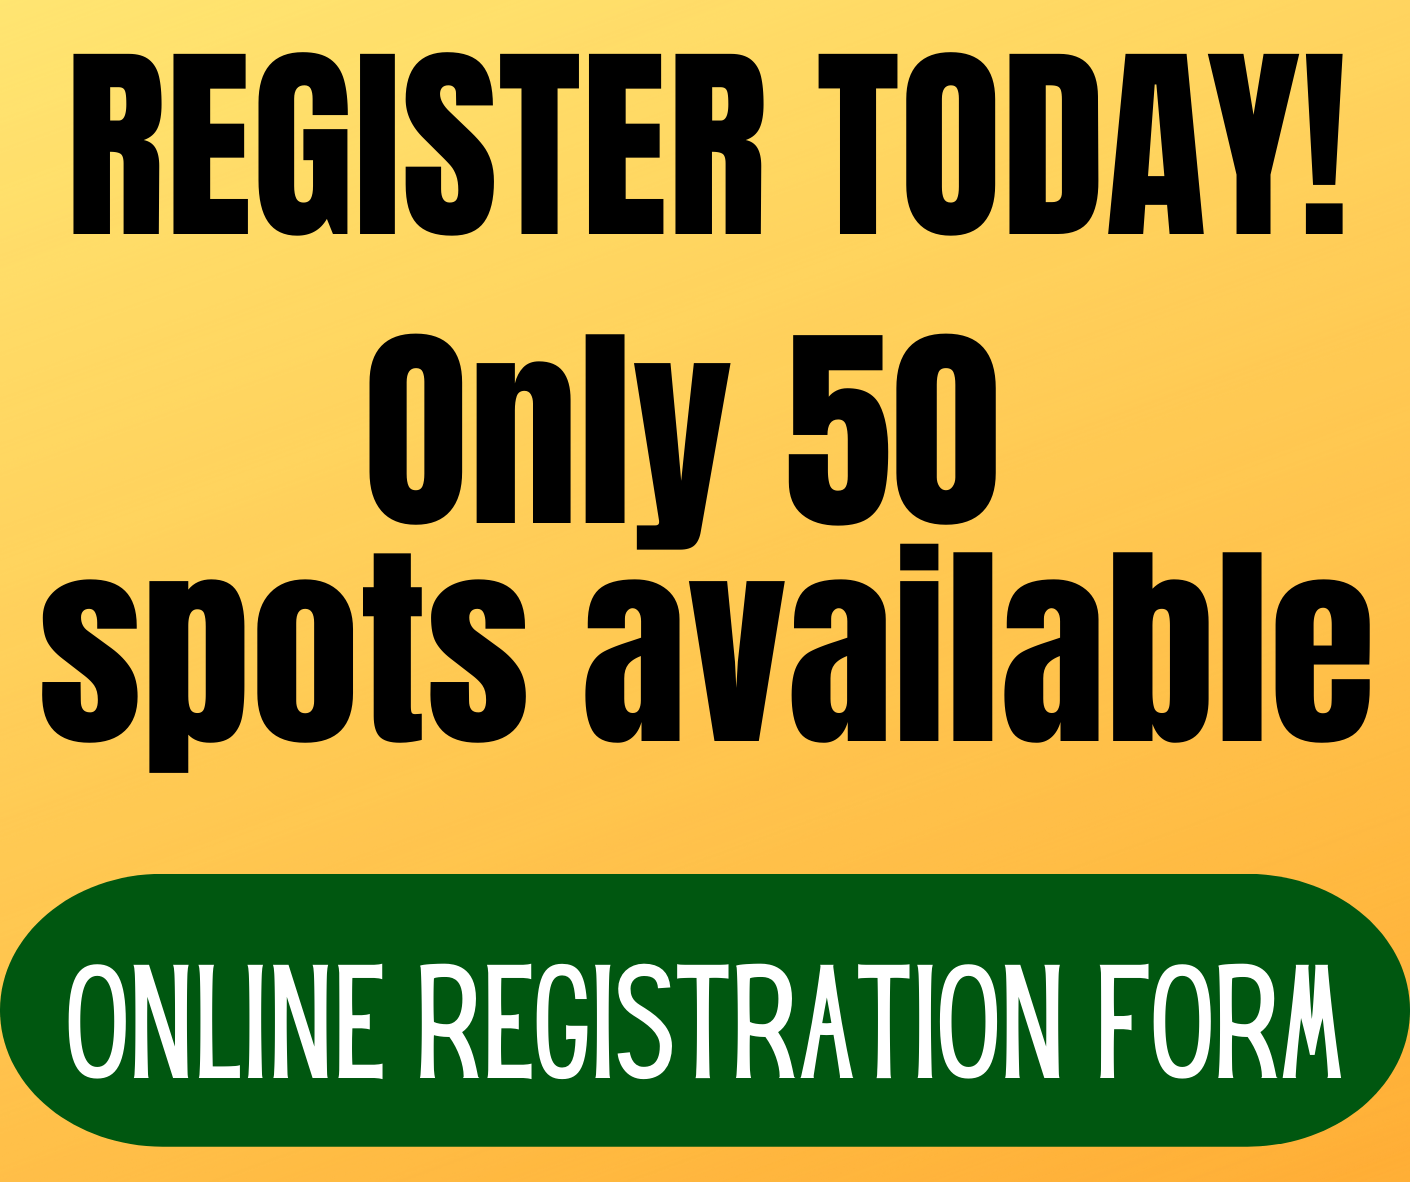 register today! only 50 spots available. online registration form button